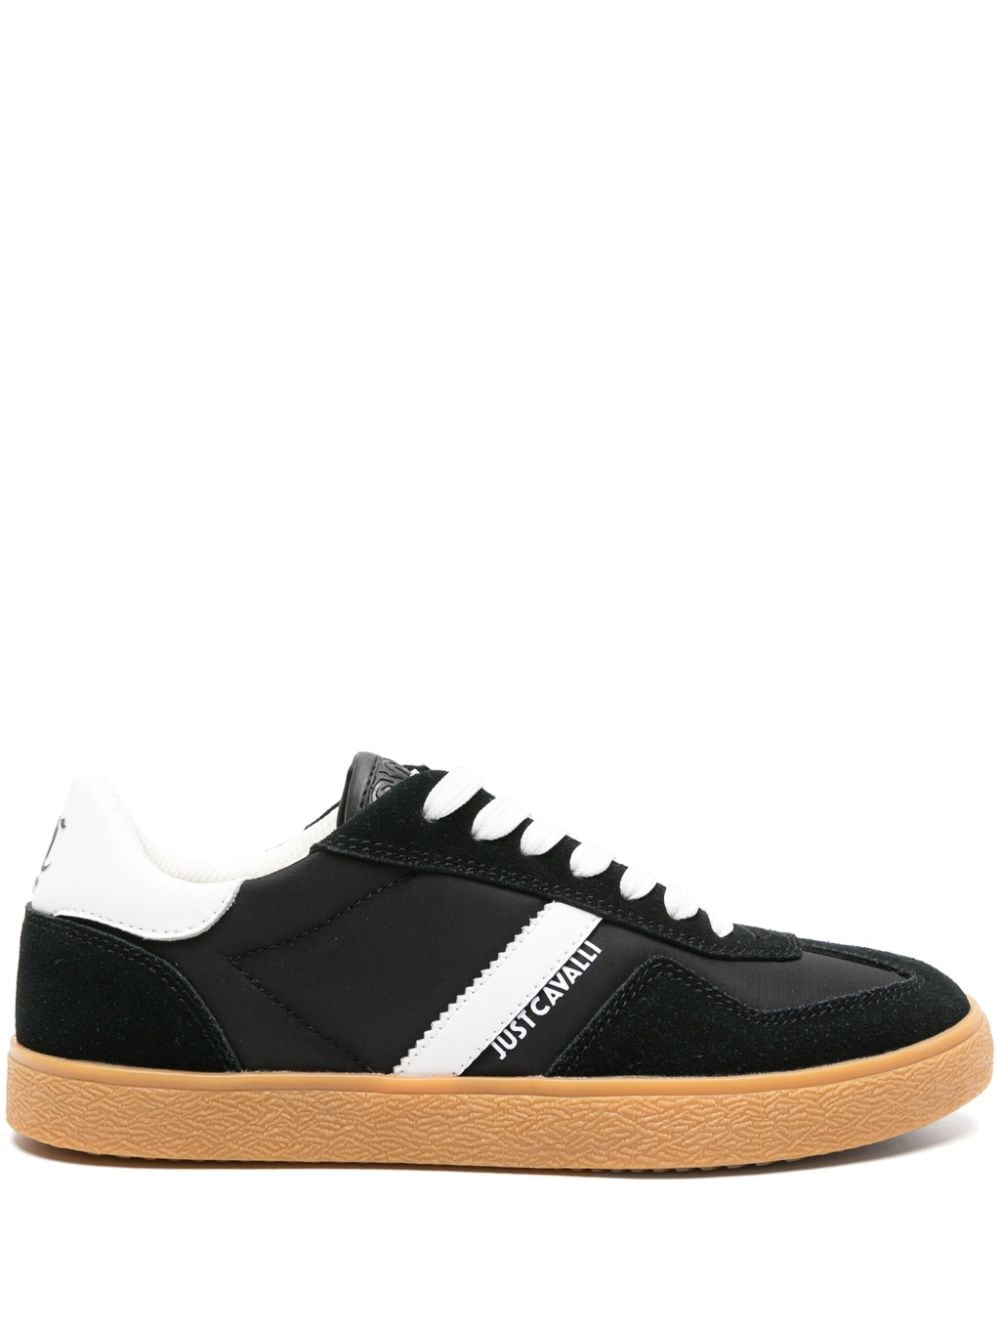 Just Cavalli panelled leather lace-up sneakers - Black von Just Cavalli